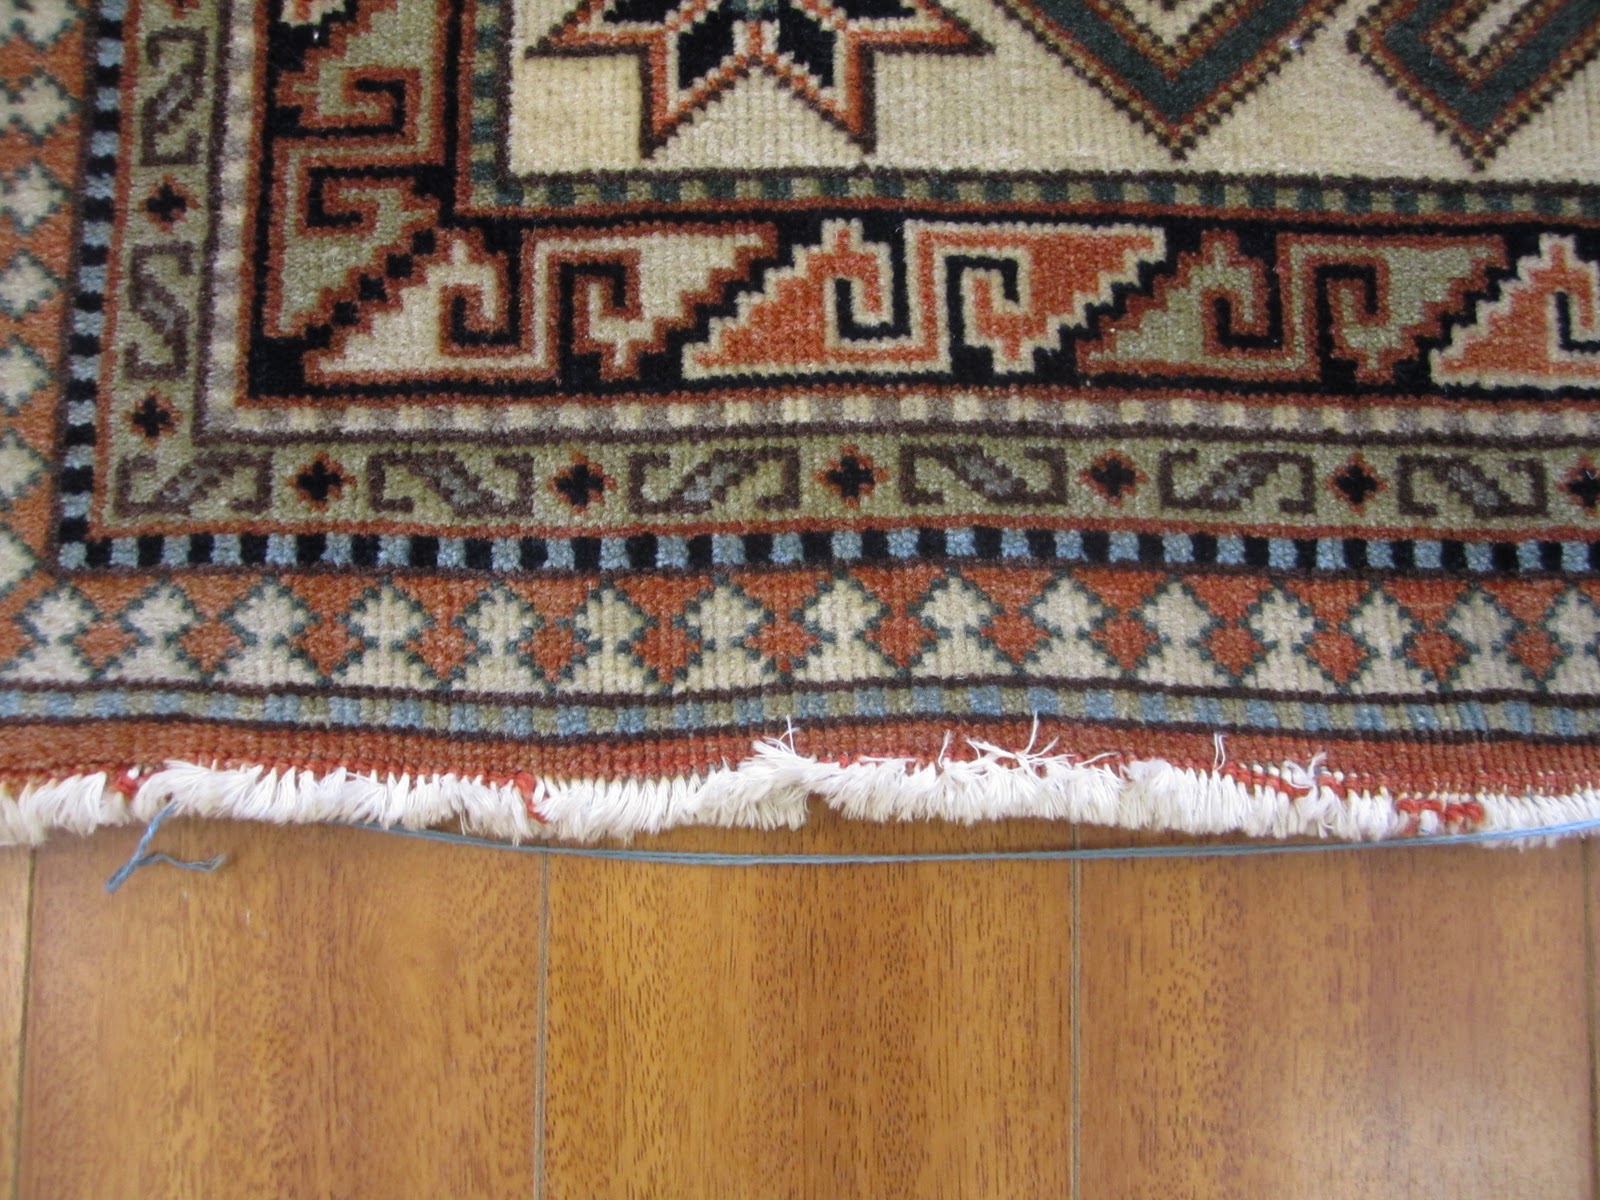 Rug Master: Securing Fringes at the End of Rugs